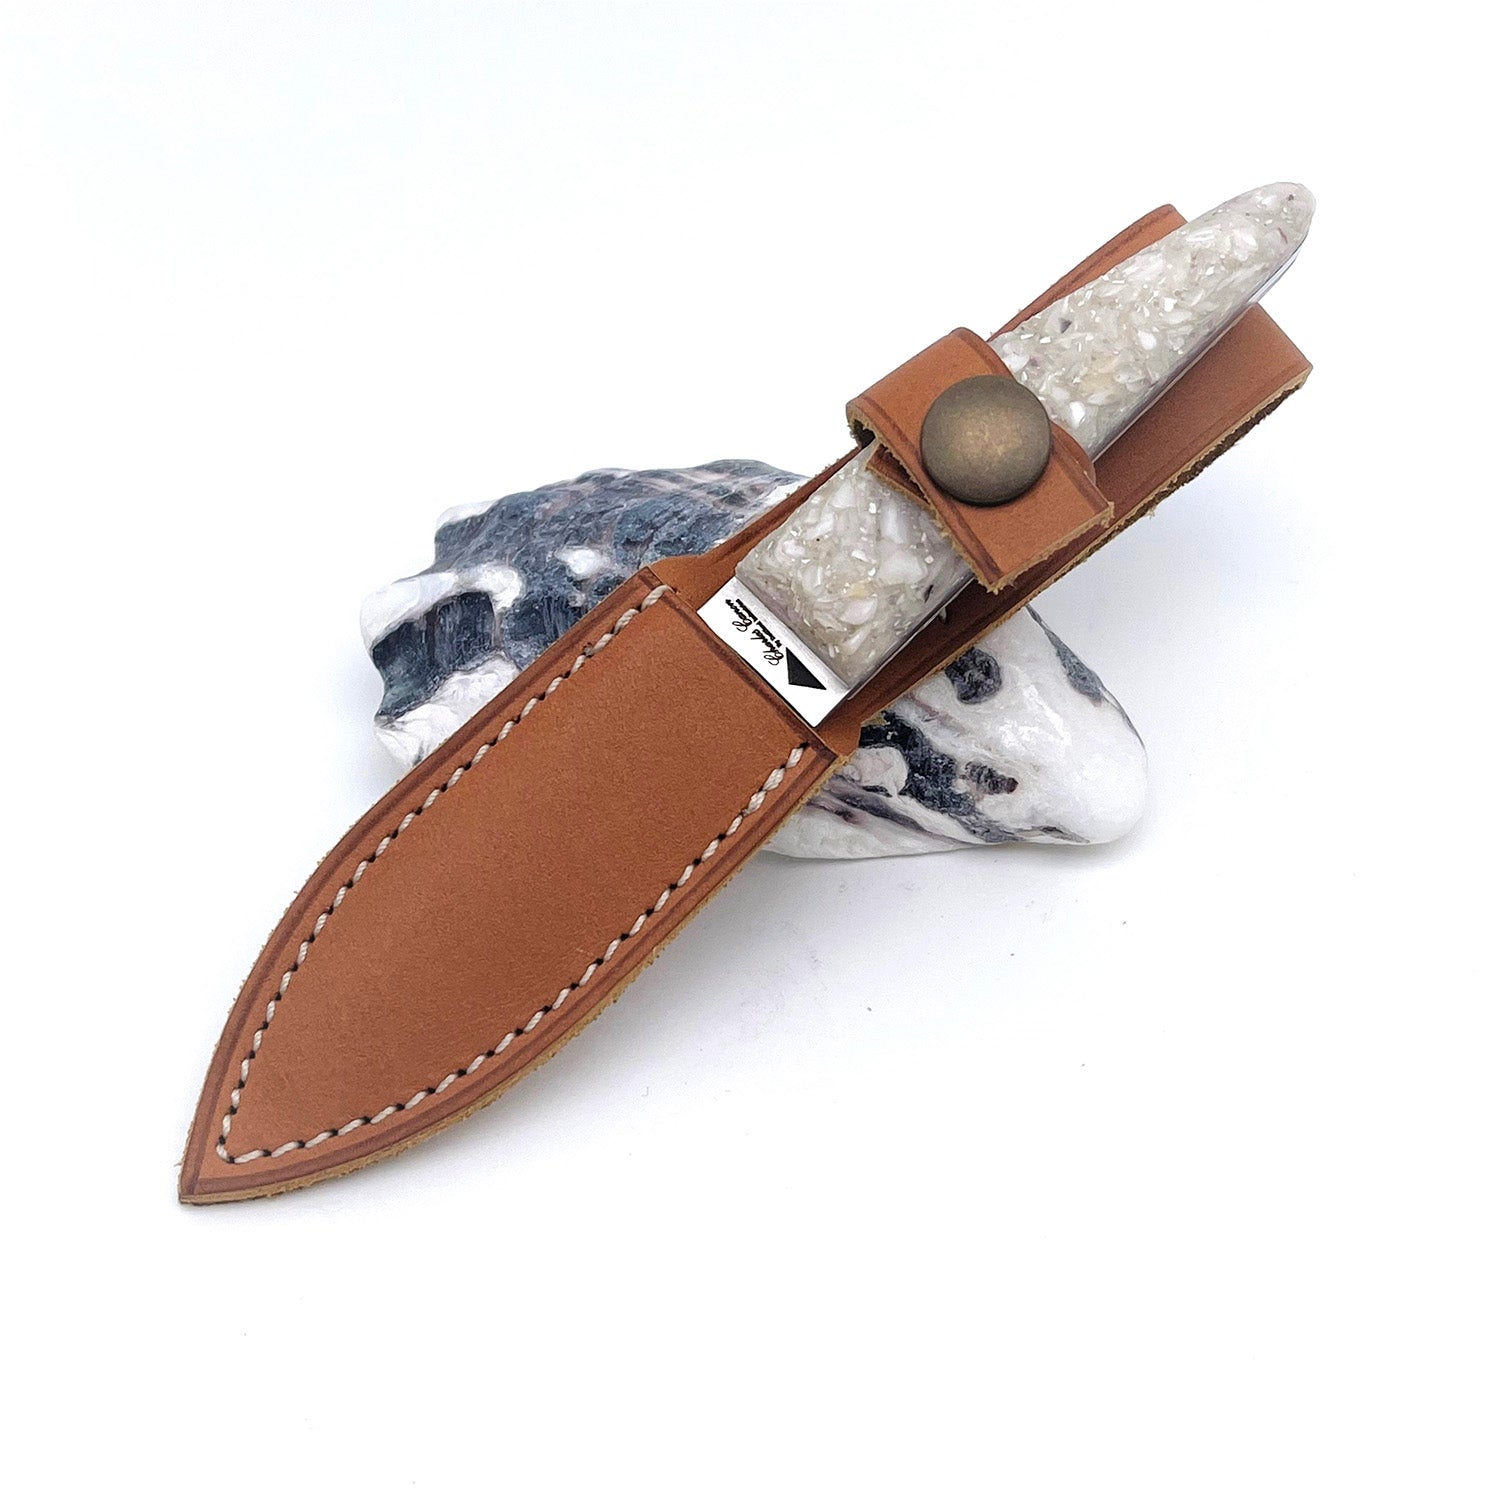 Children's knife with a handle made from recycled oyster shells